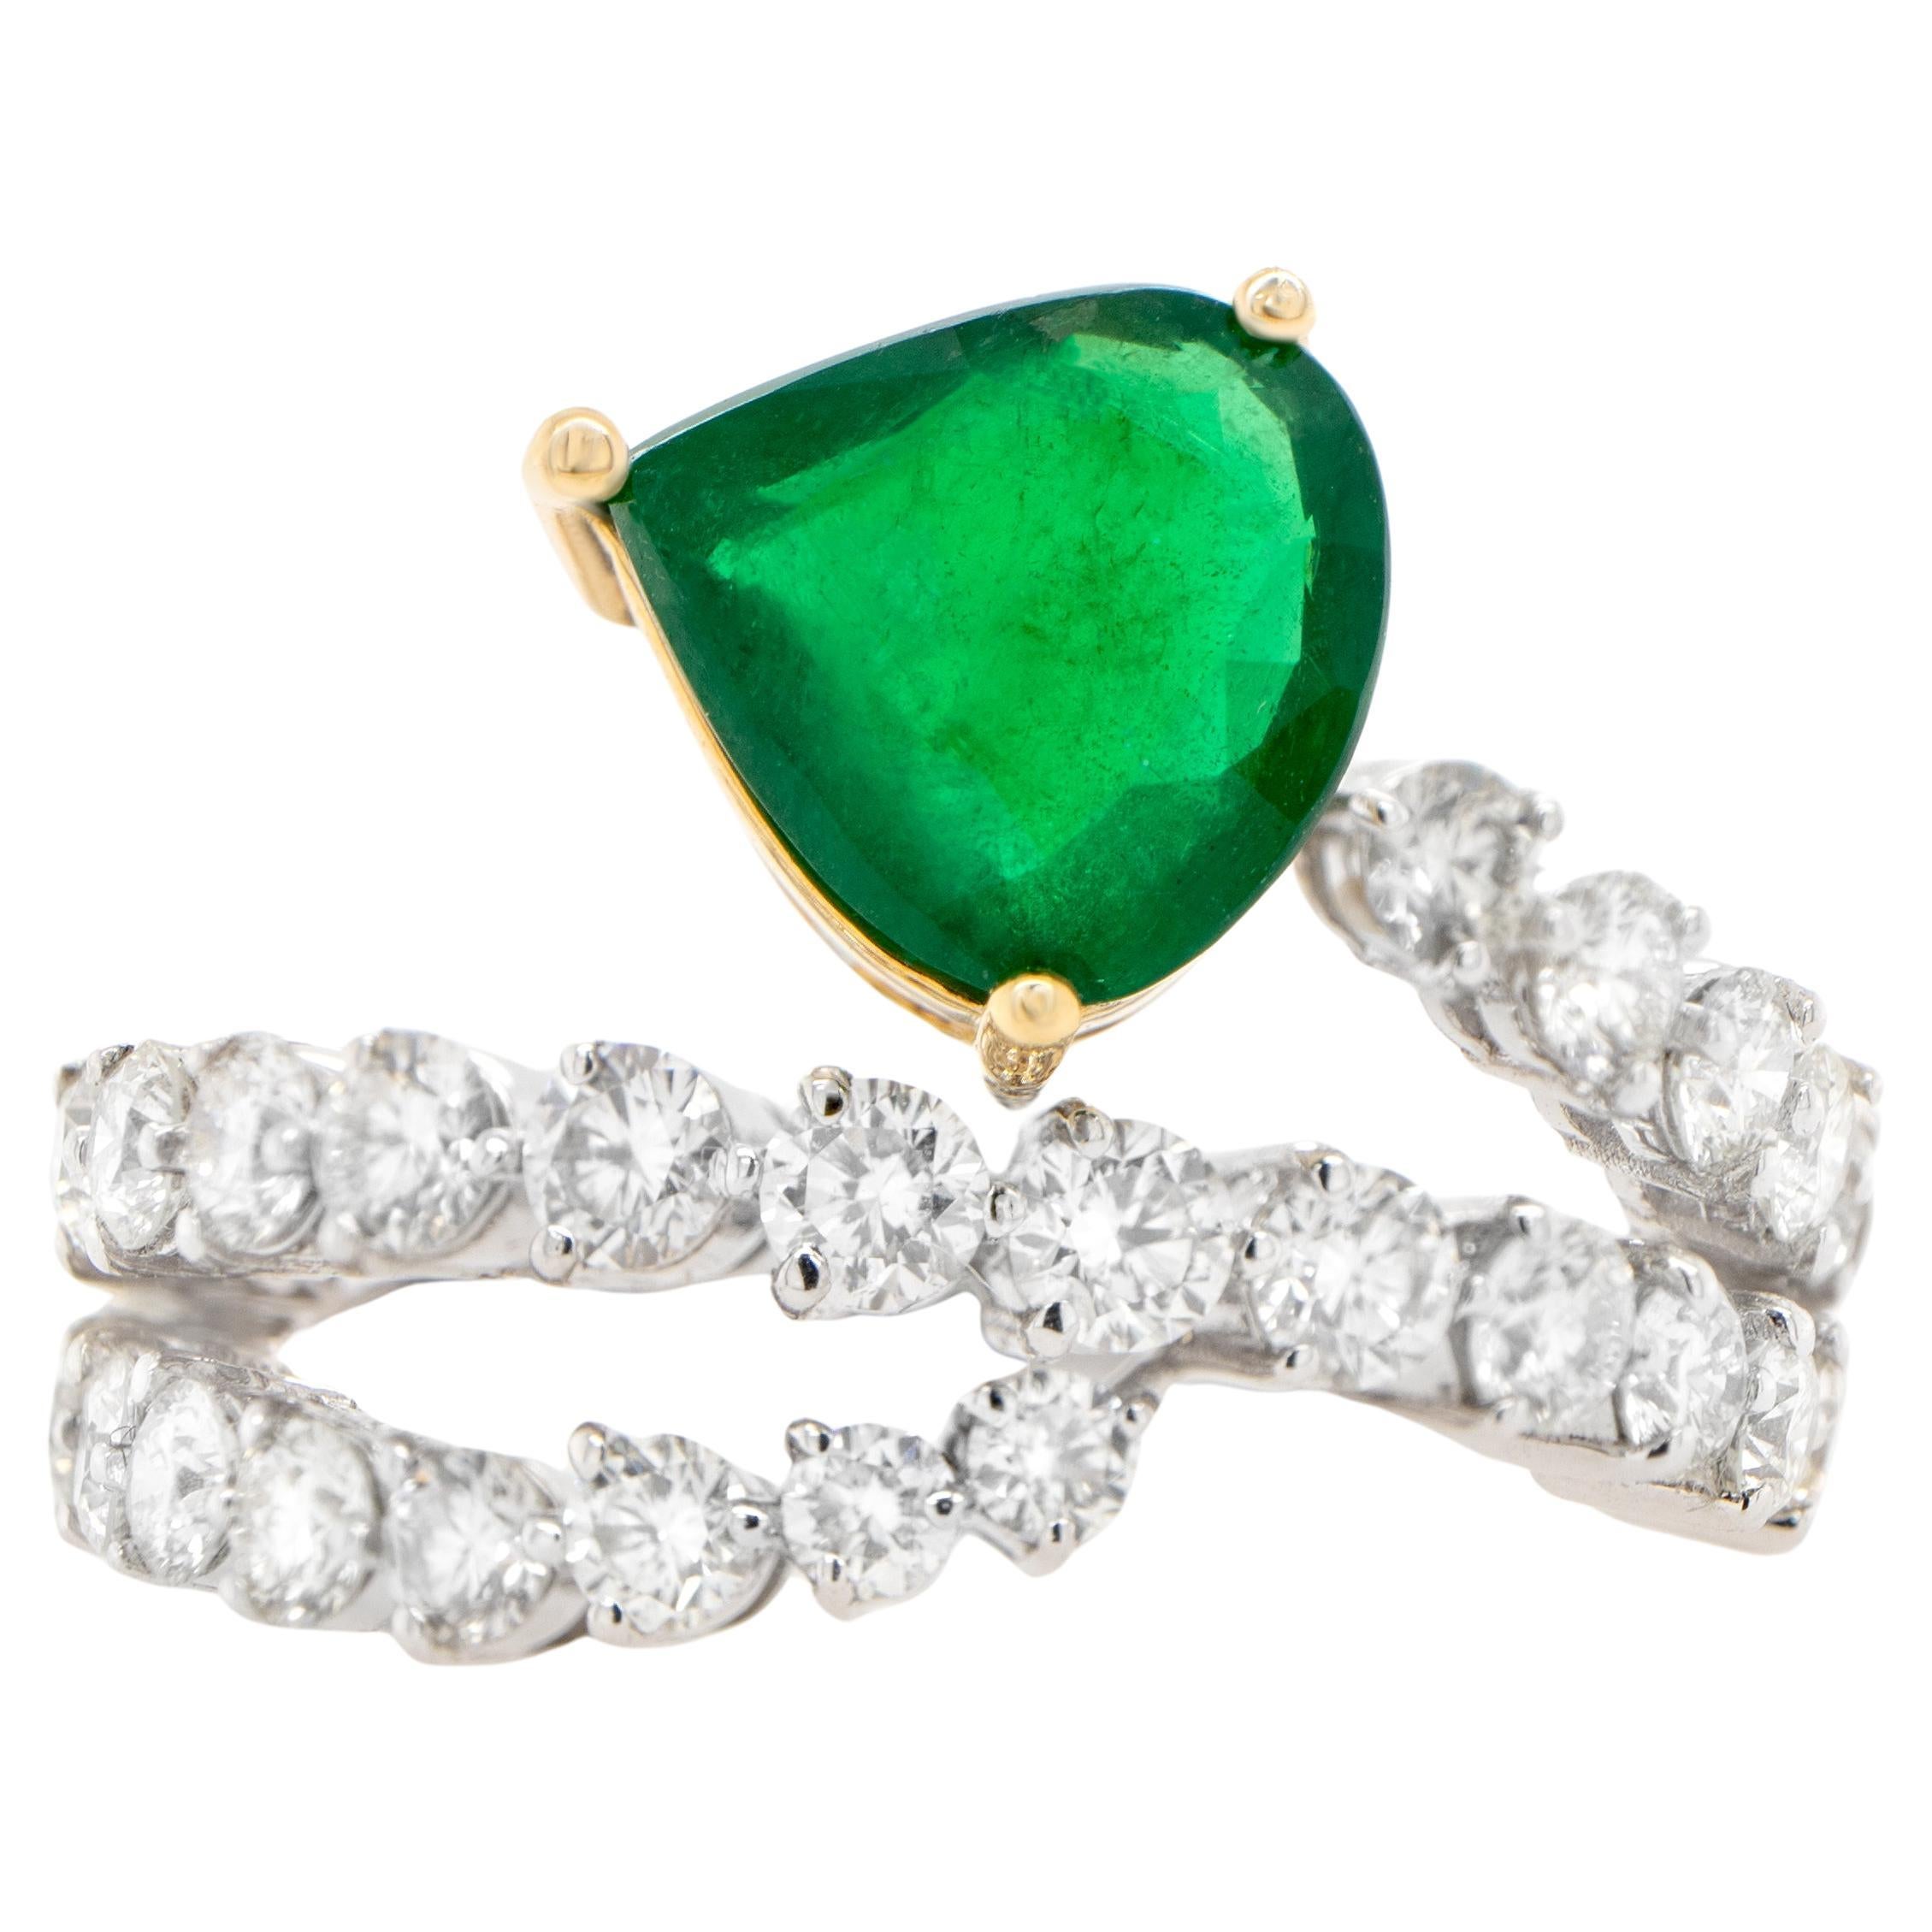 Emerald Serpent Ring With Diamonds 3.41 Carats 18K Gold